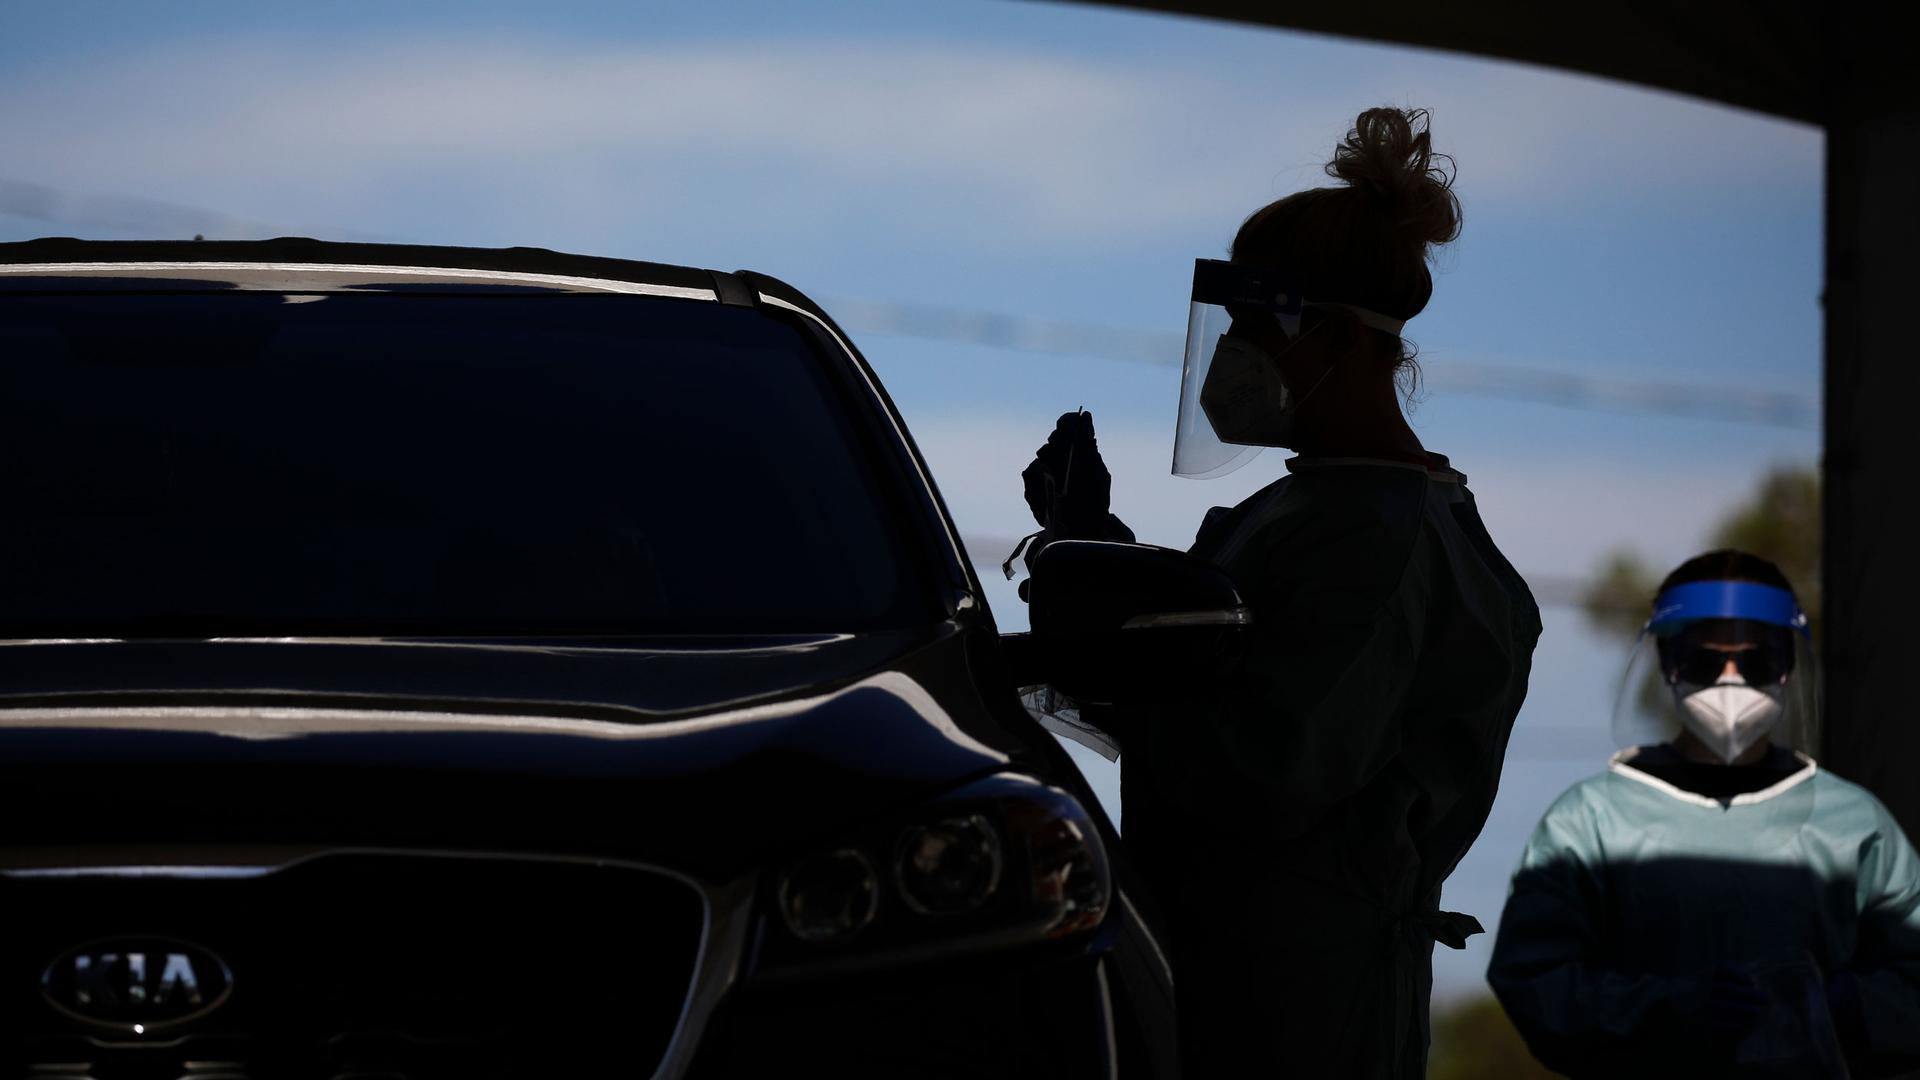 A healthcare worker is shown in shadow standing next to a car and wearing a protective face shield.